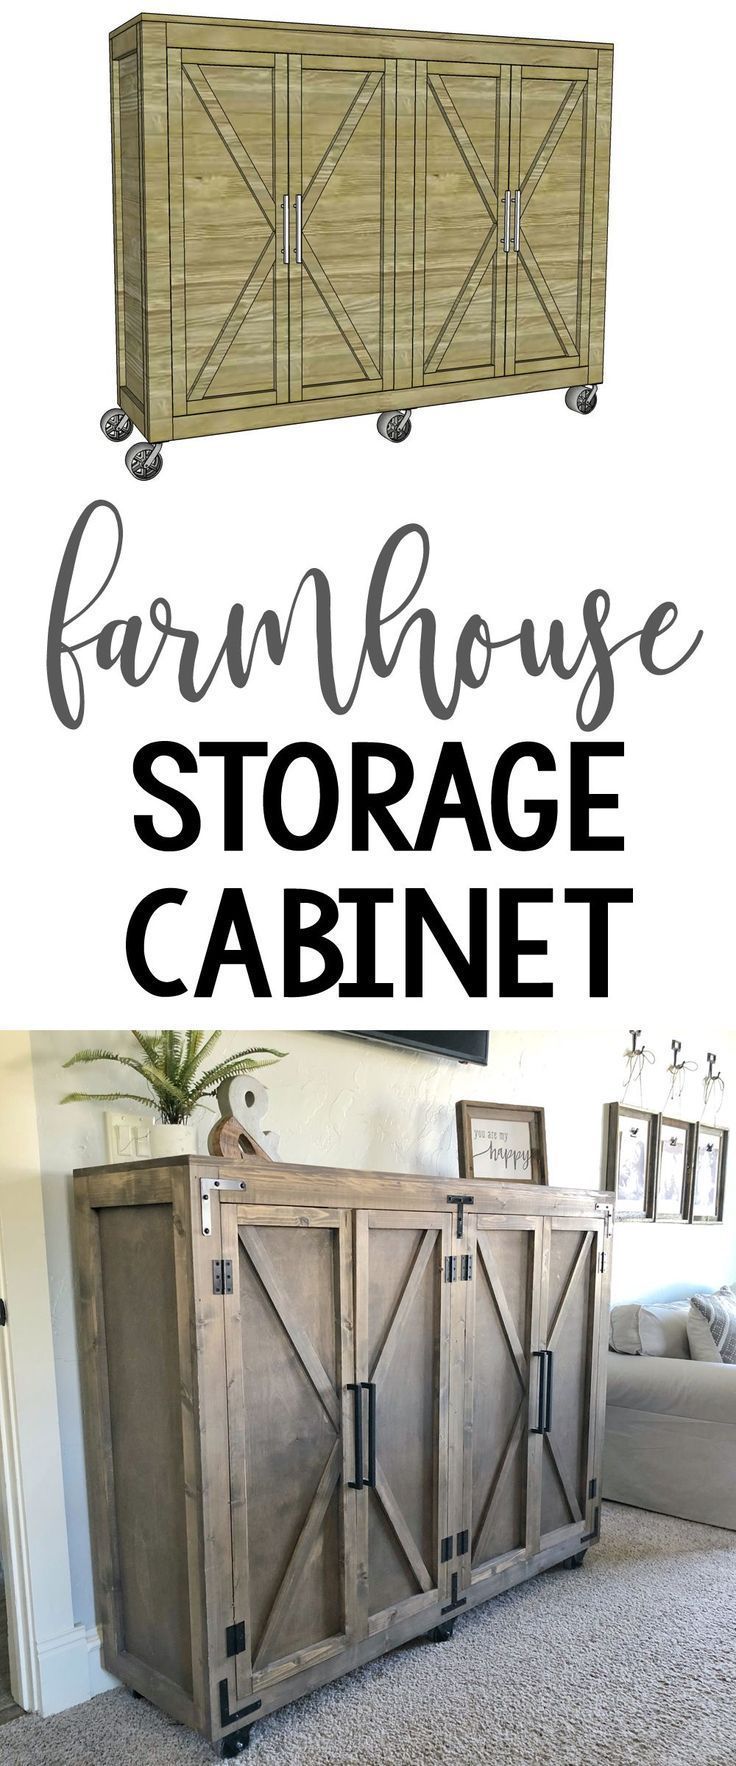 17 diy projects Storage house
 ideas